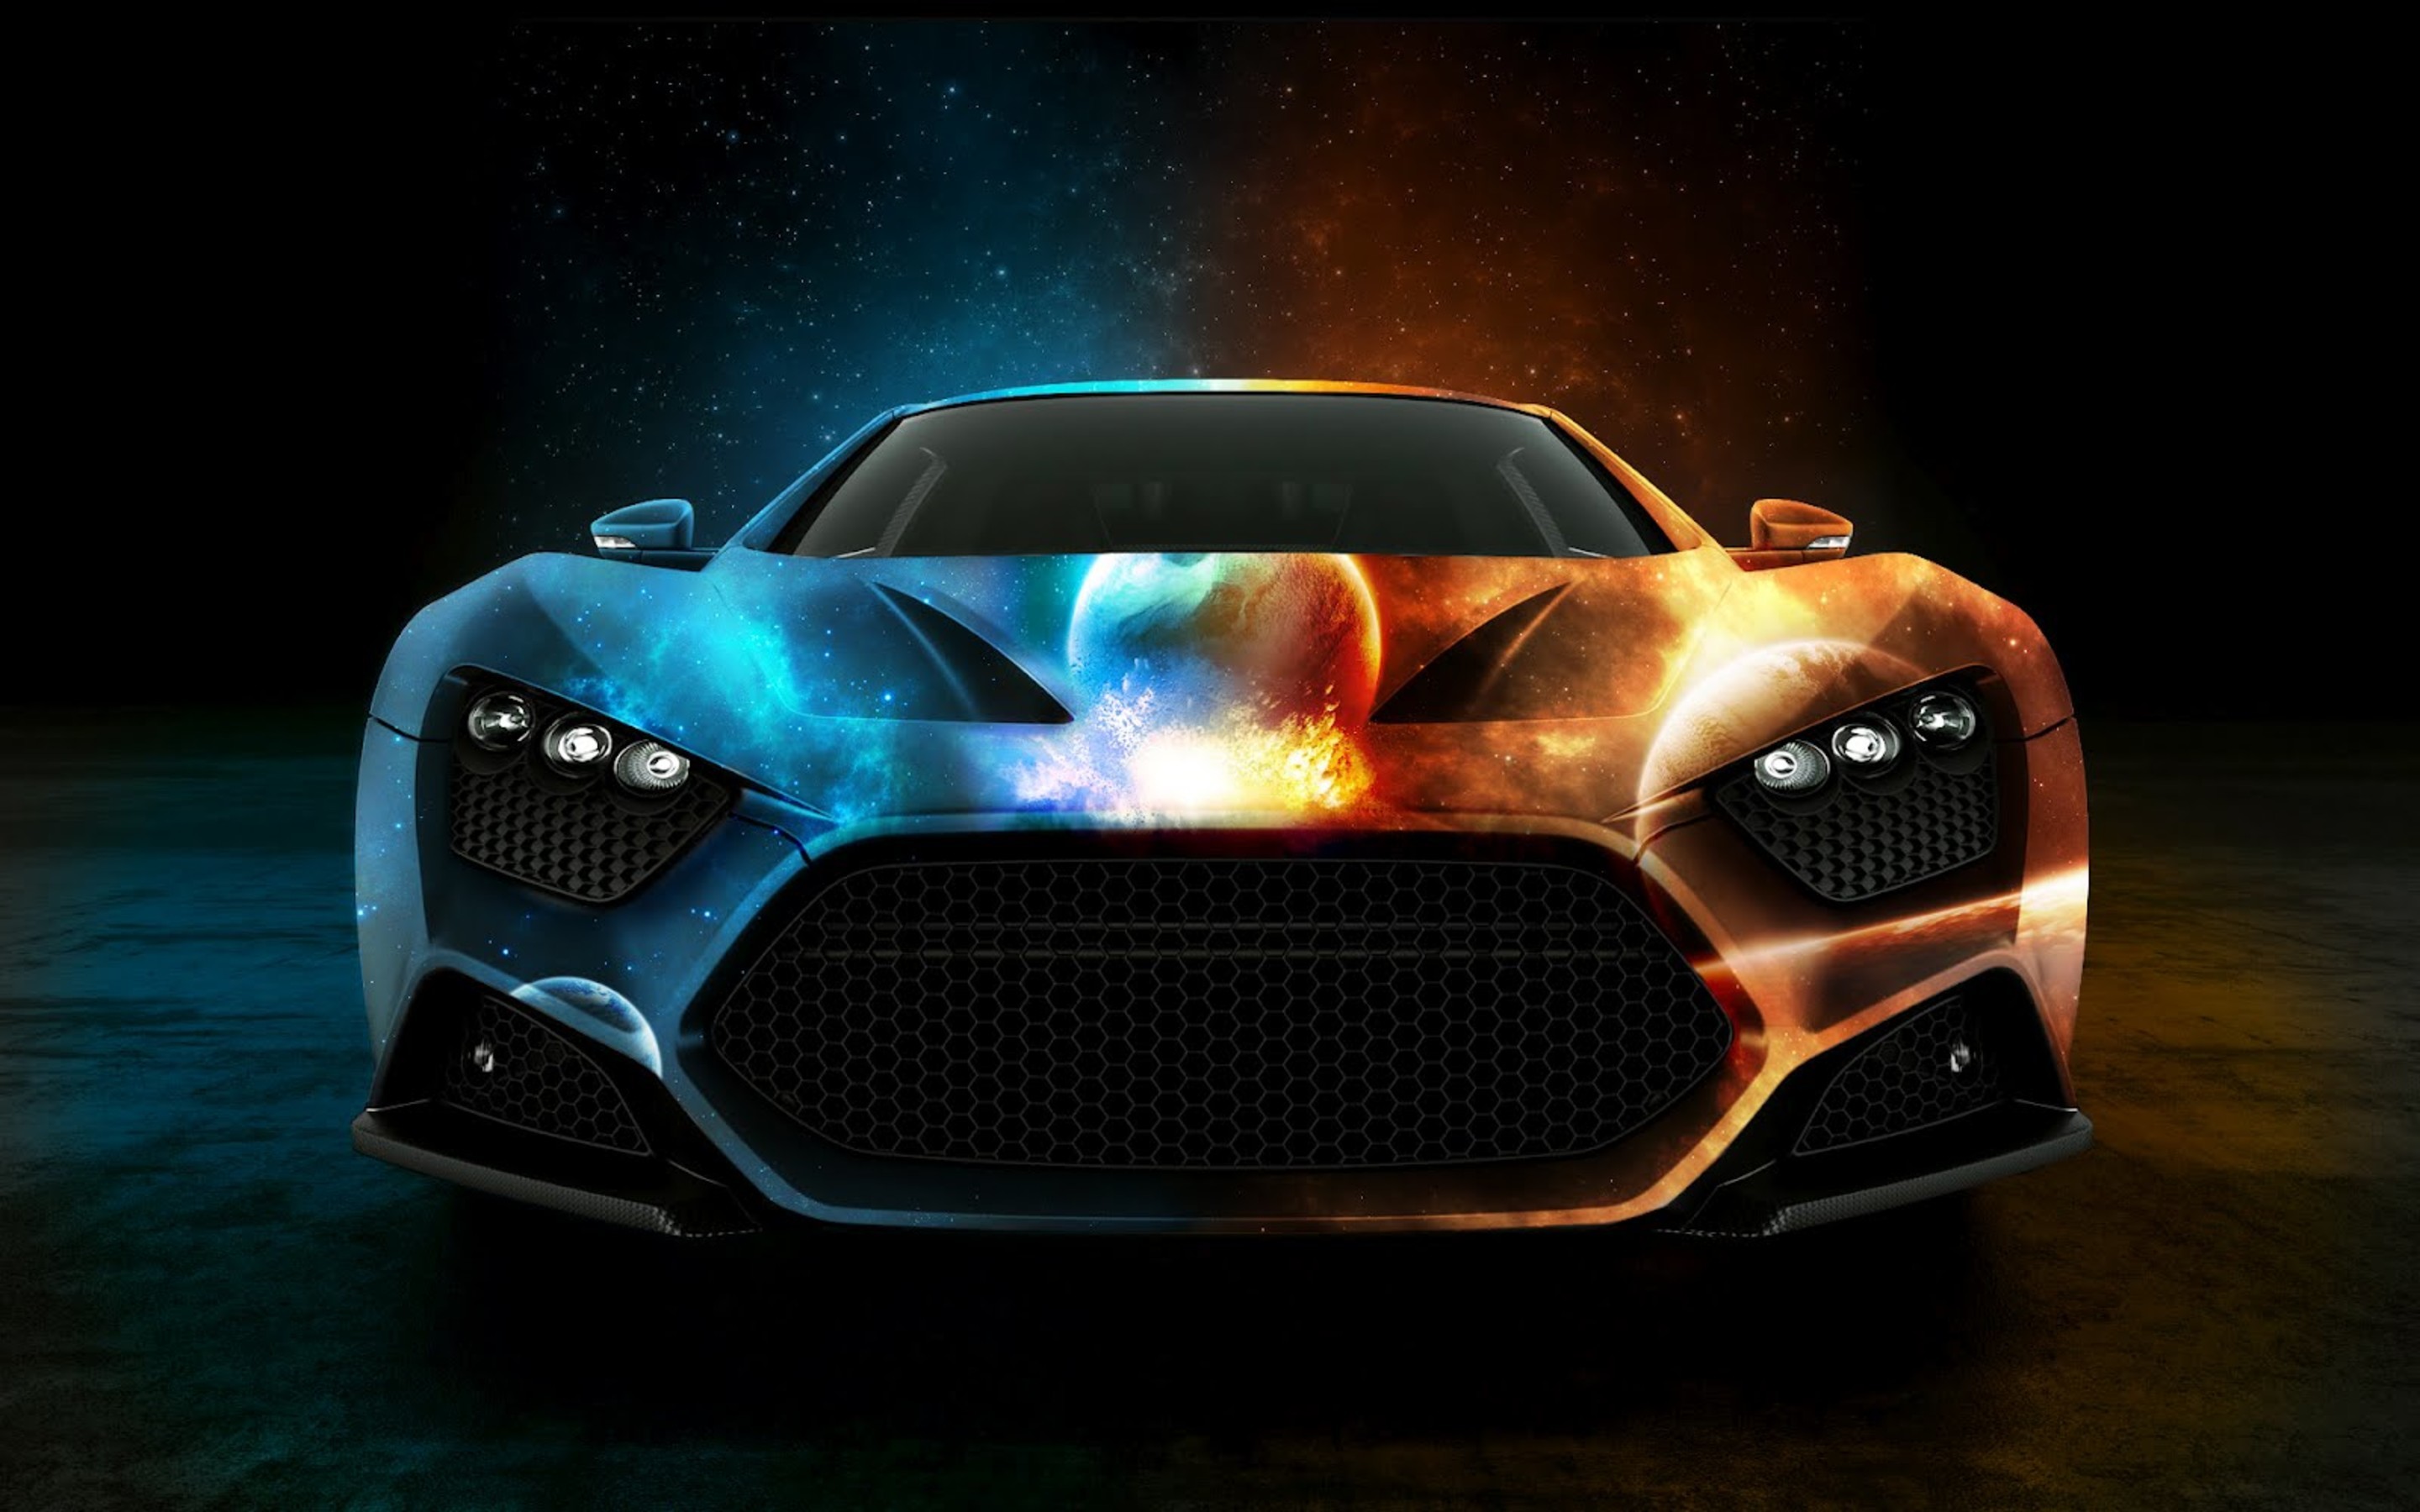 Collection of Car Hd Wallpaper on HDWallpapers Hd Wallpapers Of Cars Wallpapers